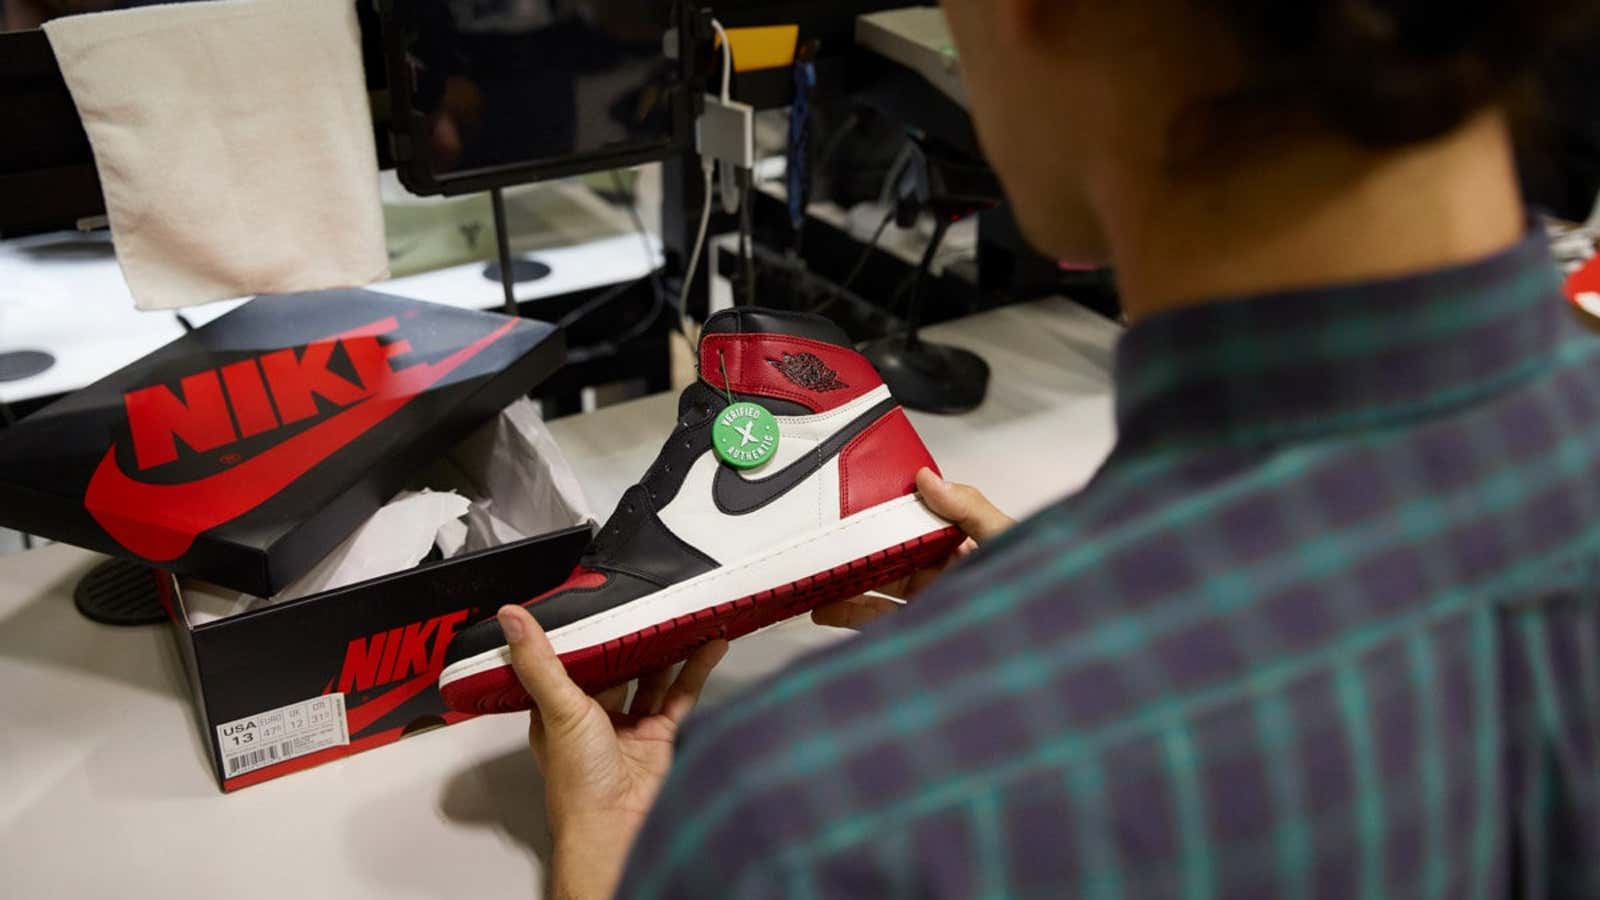 In its lawsuit, Nike said it purchased four fake pairs of shoes on StockX.